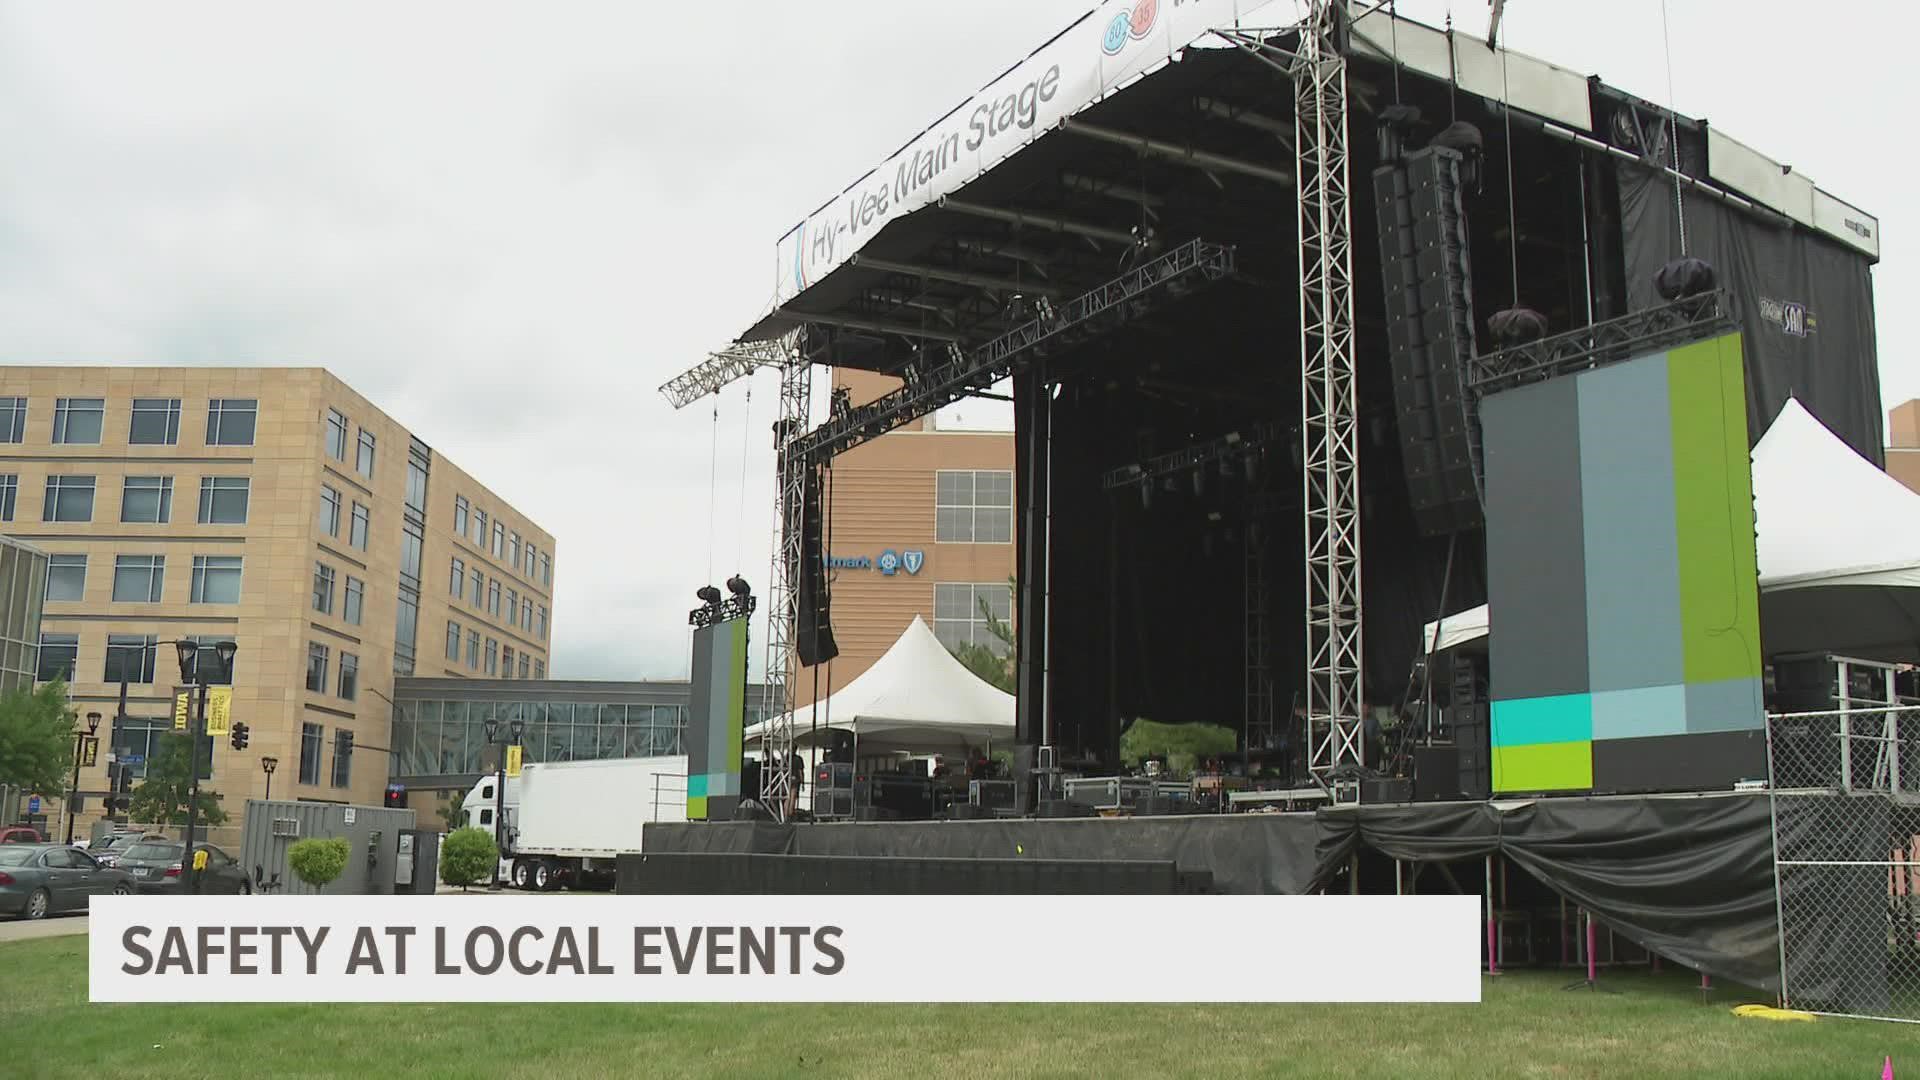 This weekend, 80/35 in downtown Des Moines and Summerfest in Ankeny will bring thousands out to enjoy music, food and more.